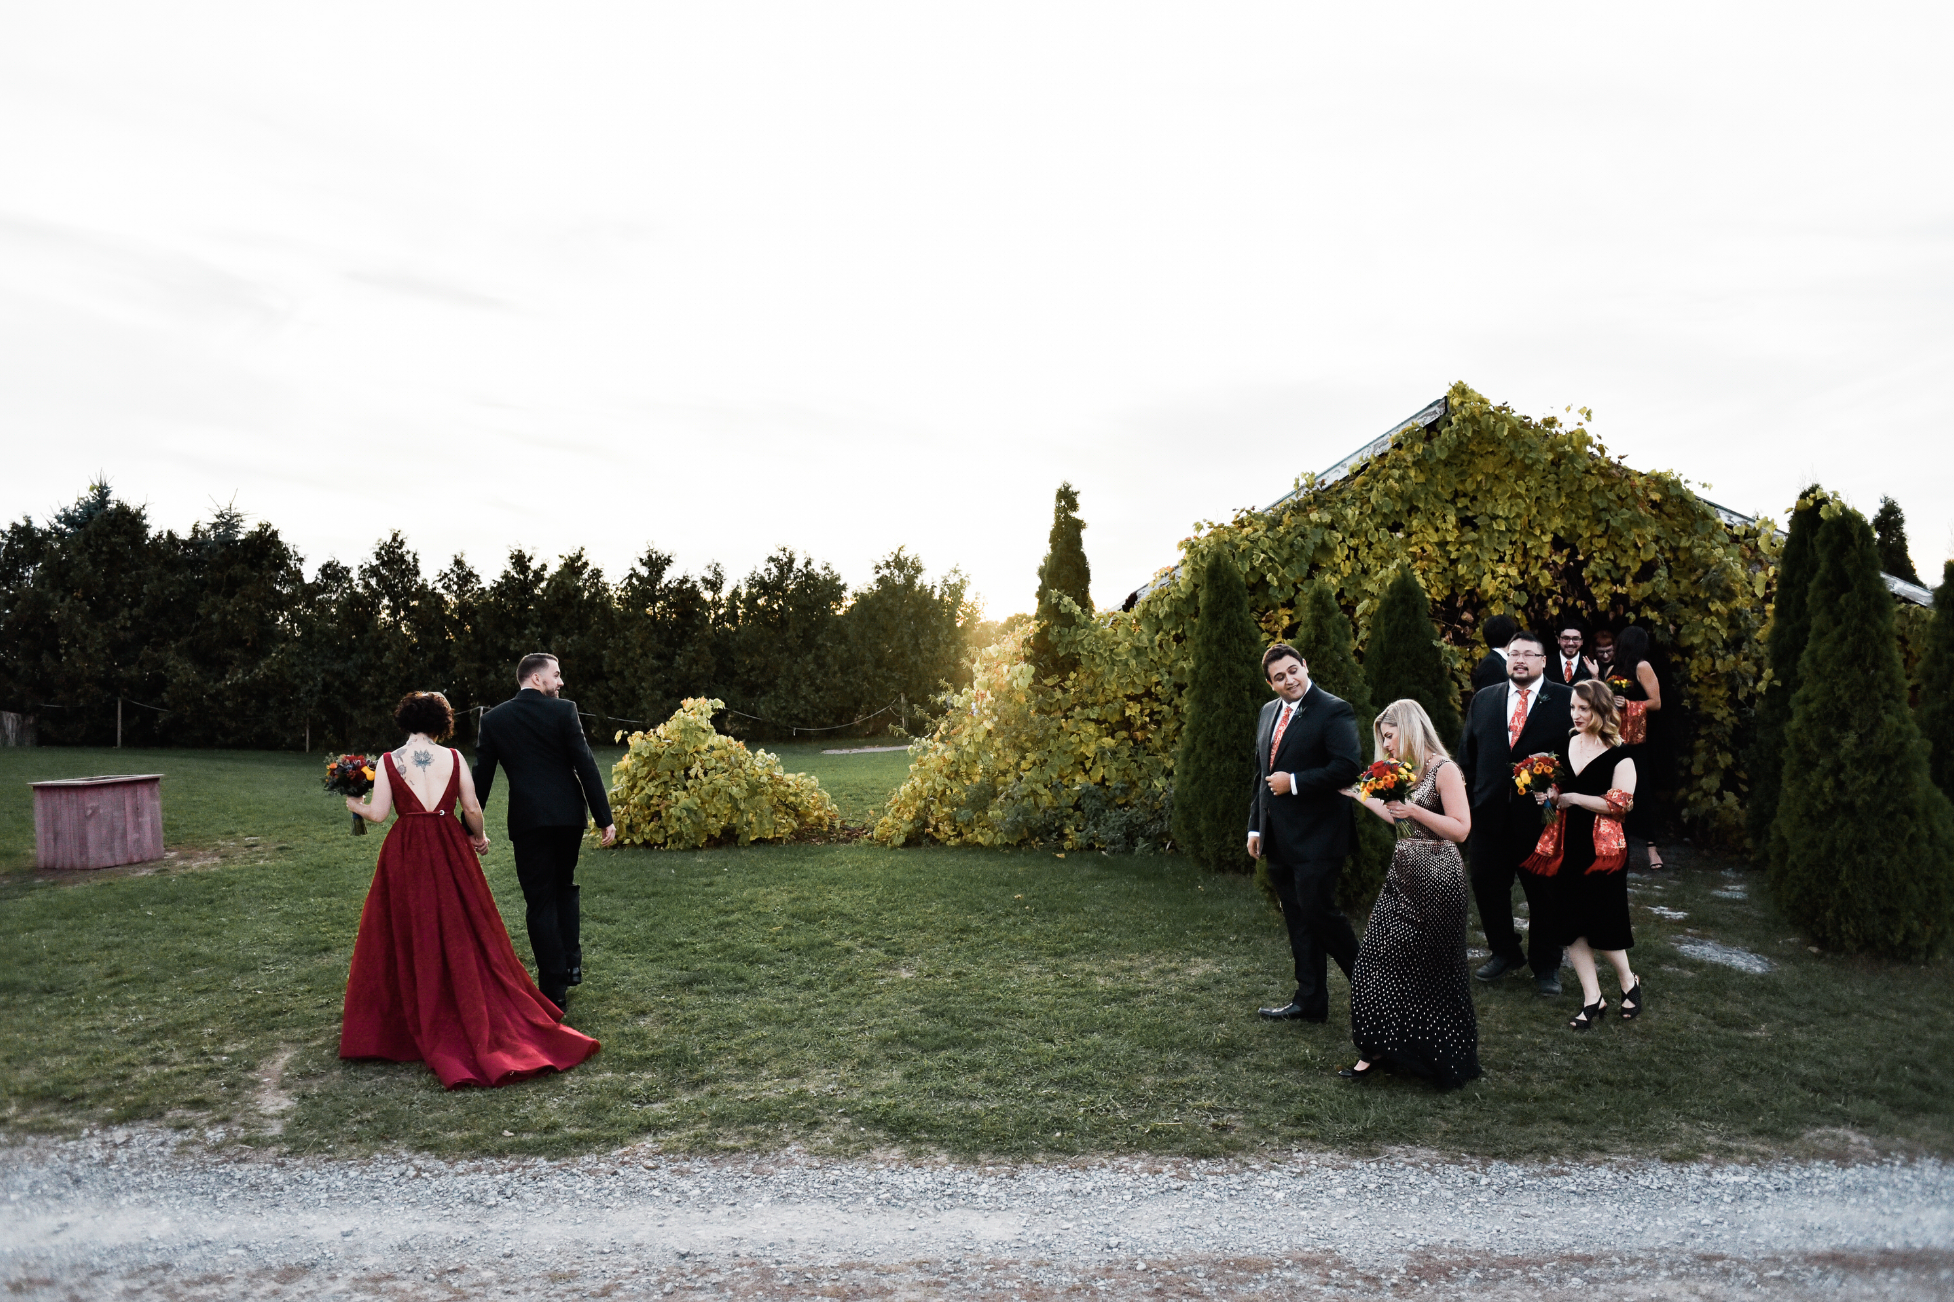 Bridal party exit the barn at fields on west lake for this sunset, autumn wedding